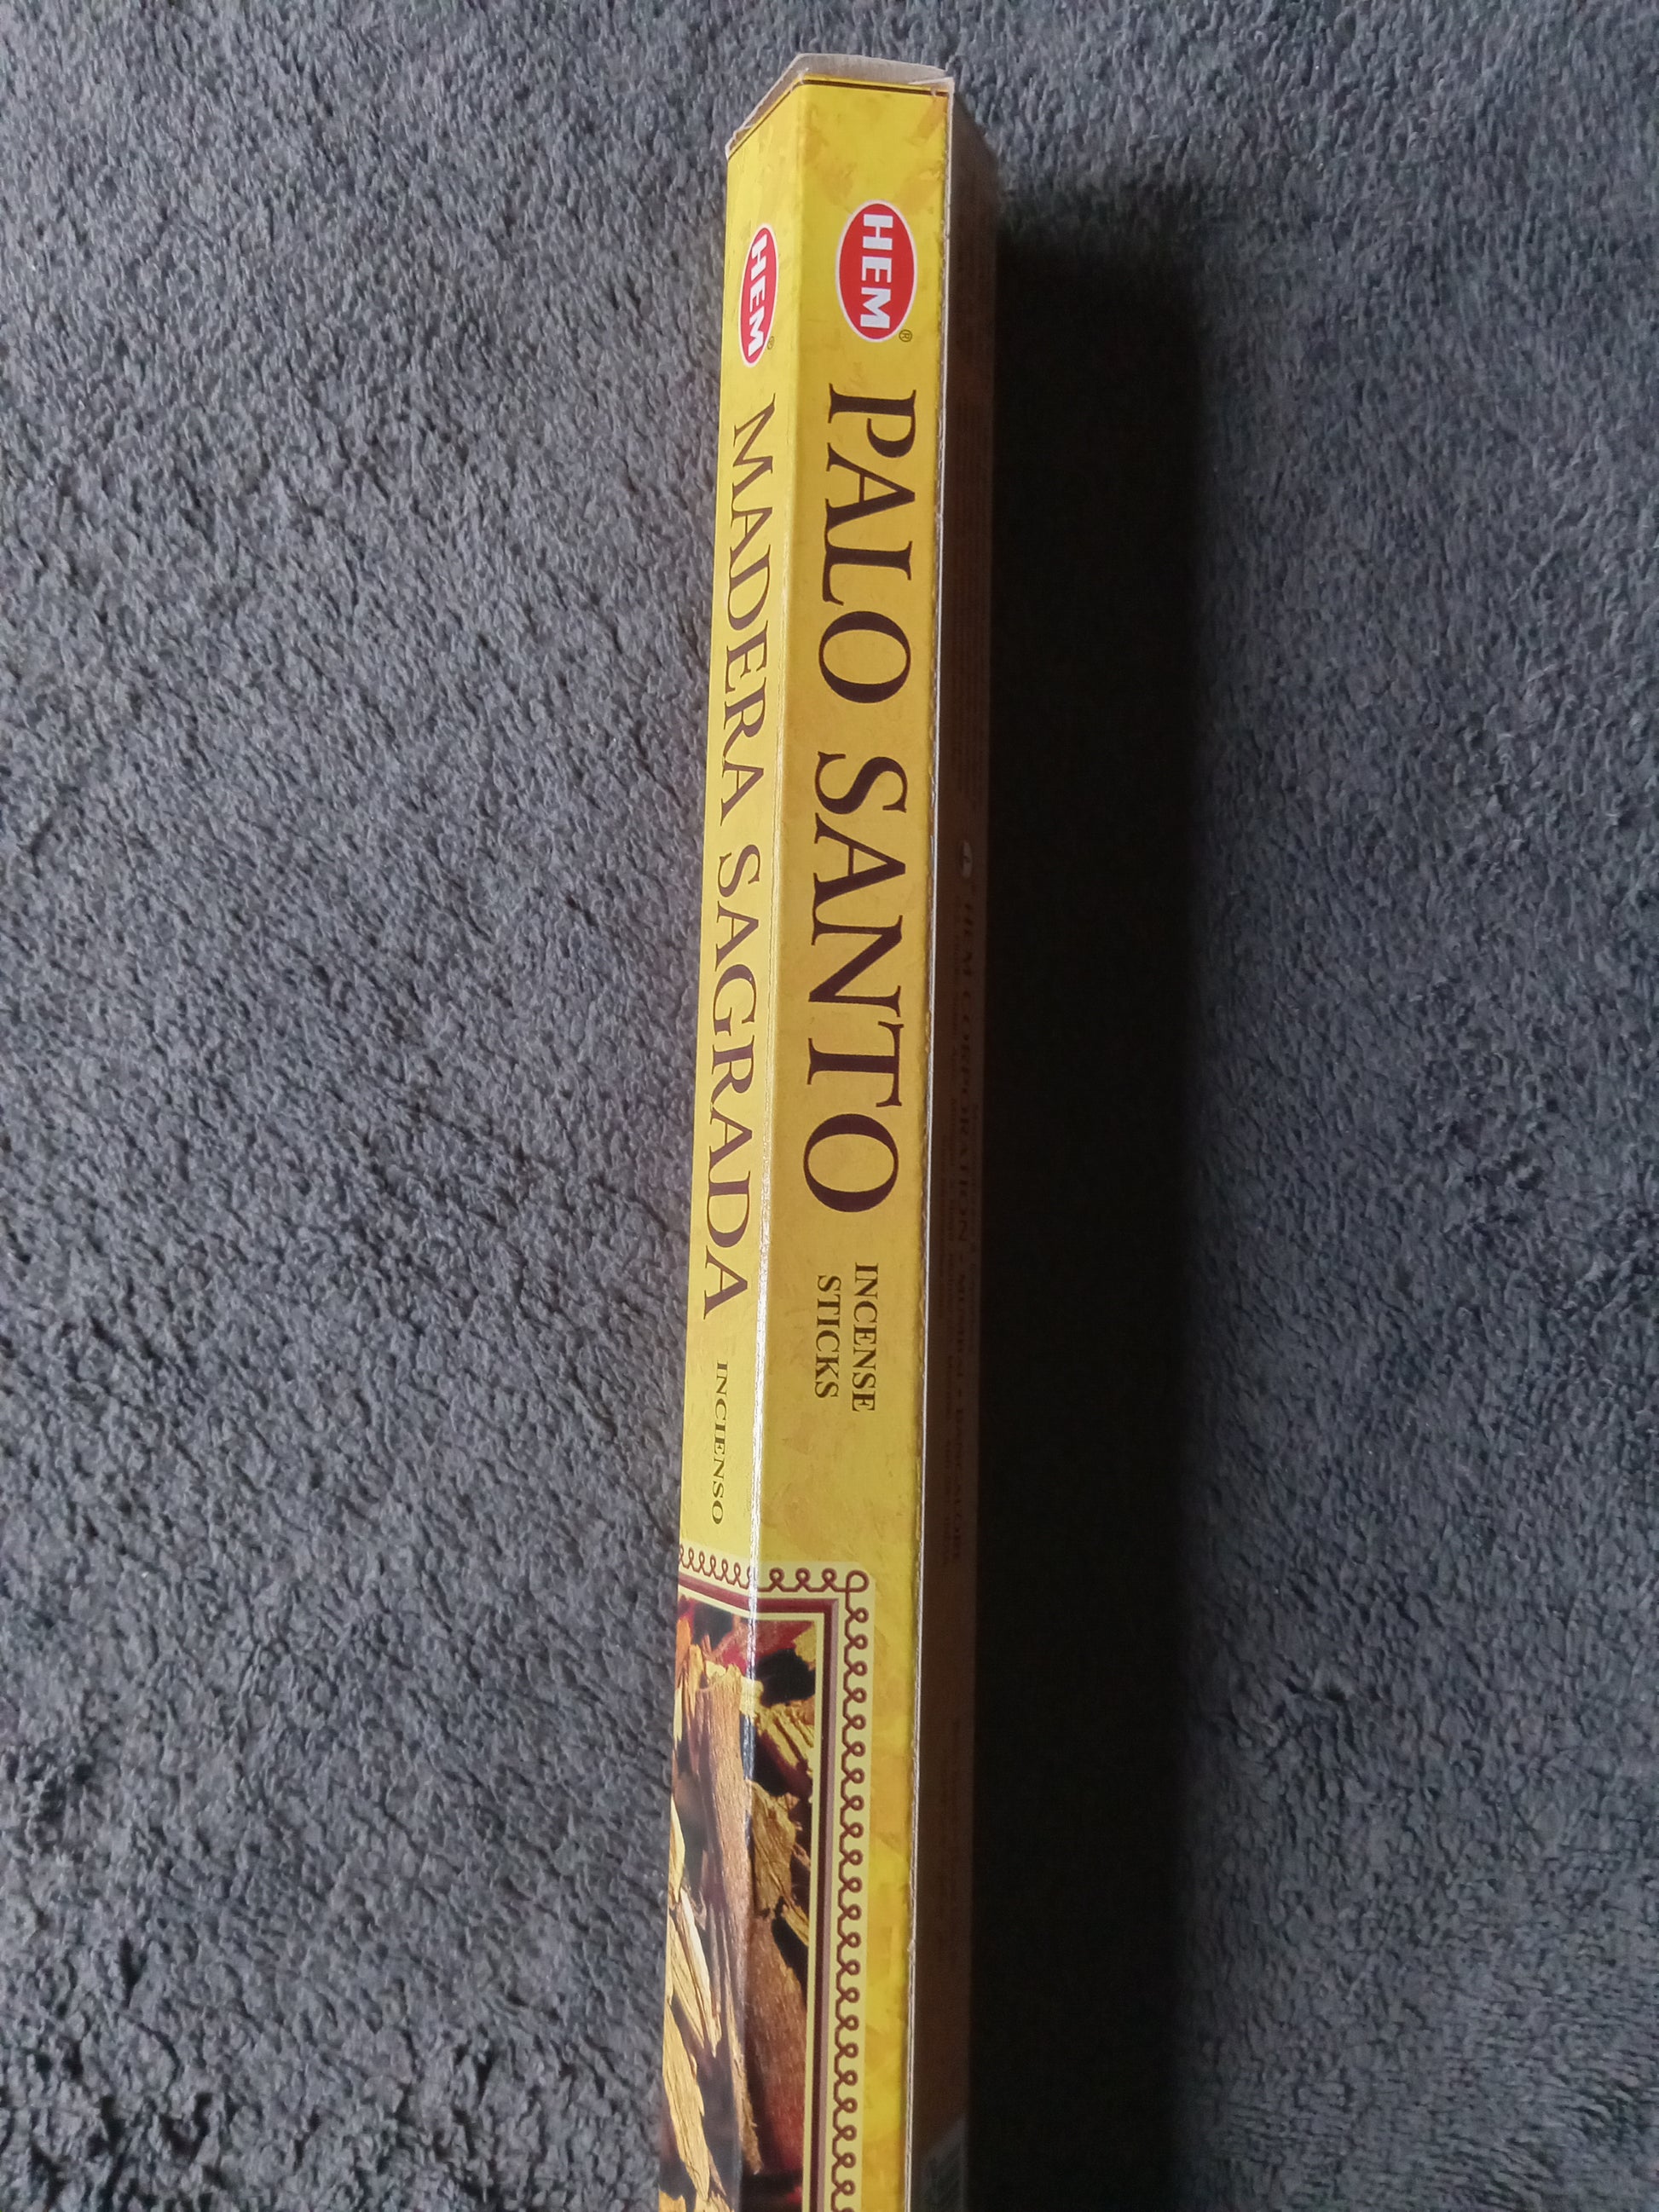  Palo Santo Incense Sticks - Incense Sticks available at Amazing Creations Products . Grab yours for $4.99 today!